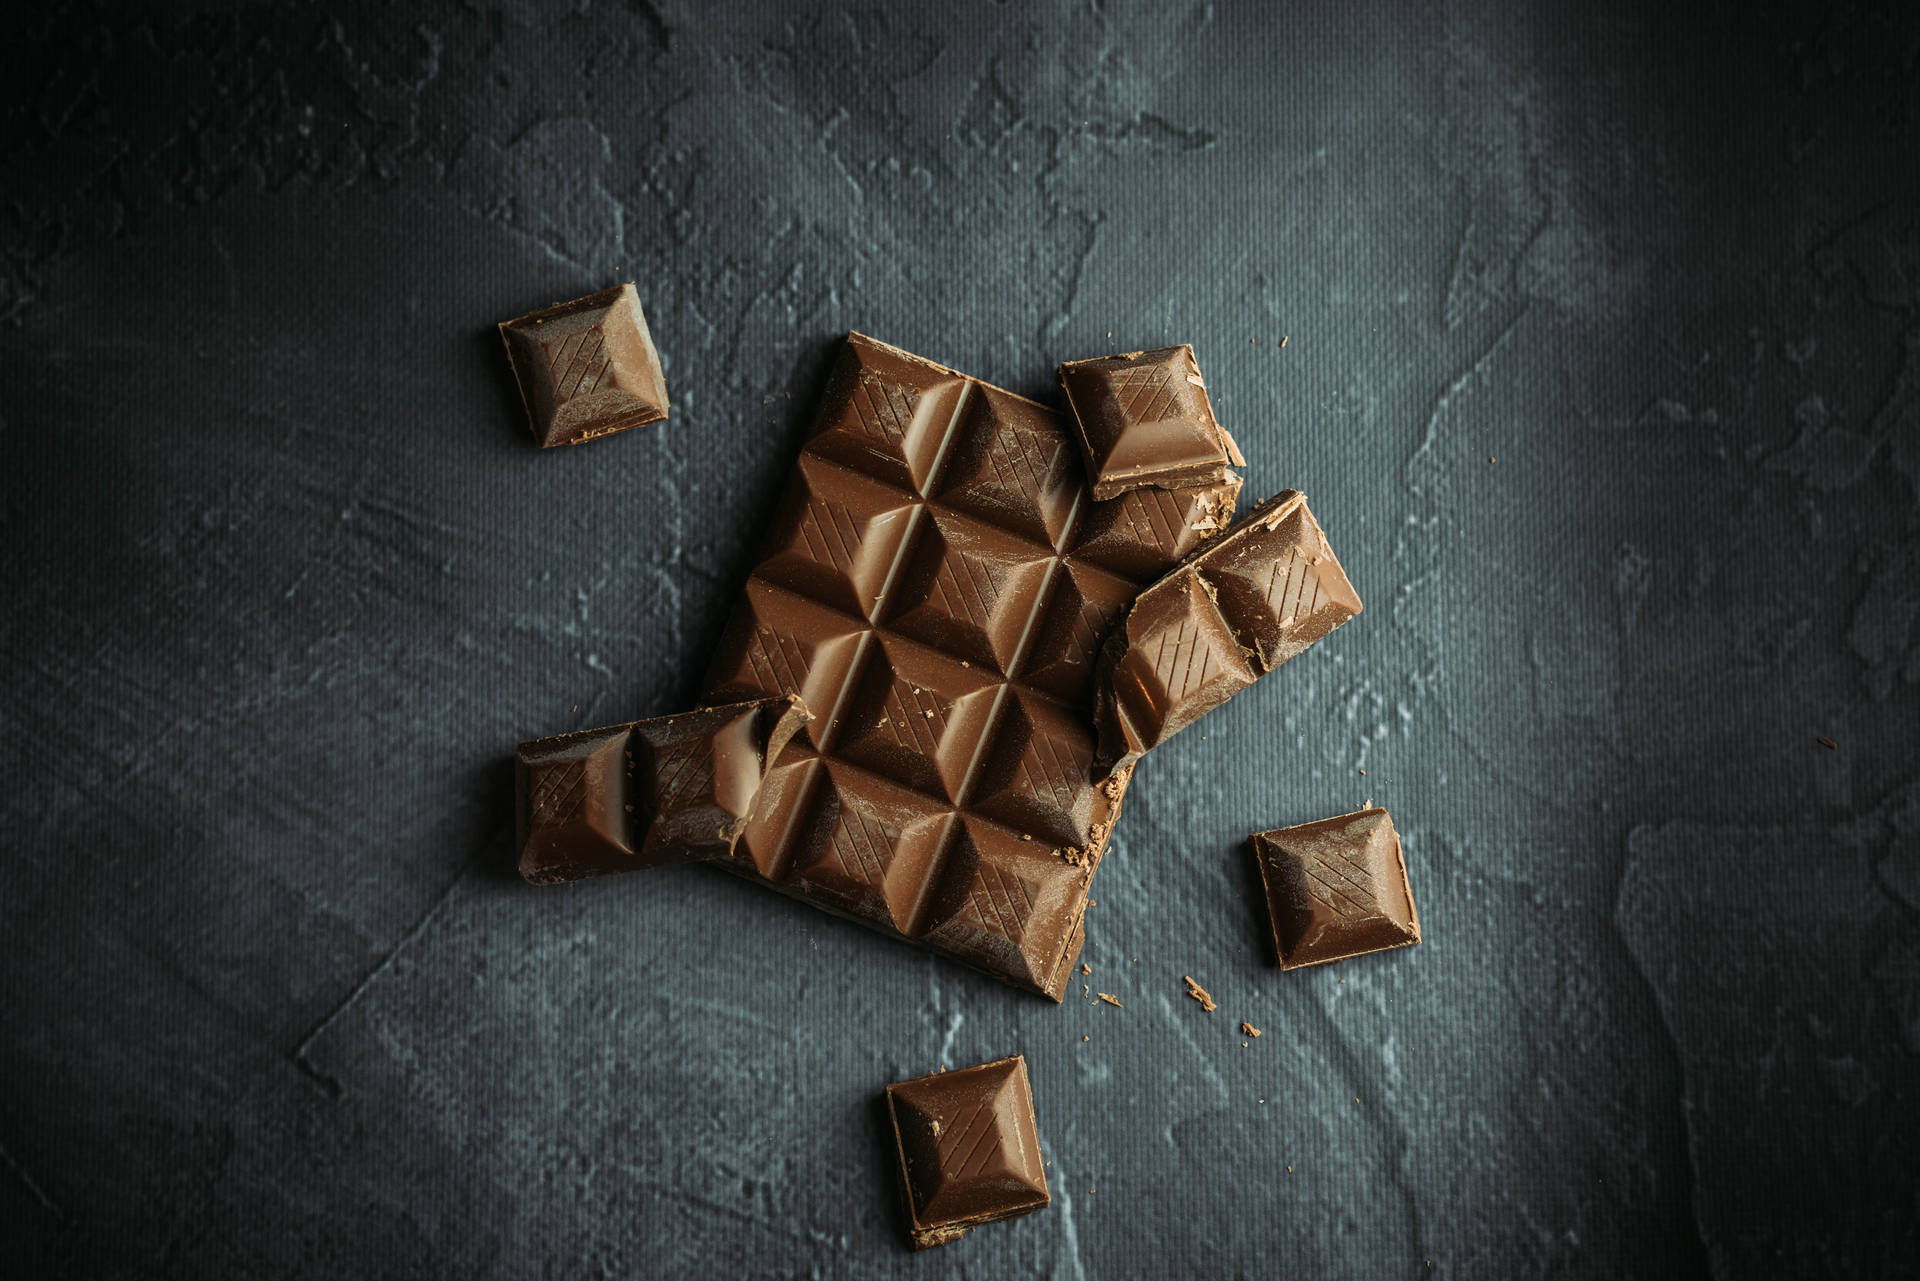 Chocolate 7360X4912 Wallpaper and Background Image